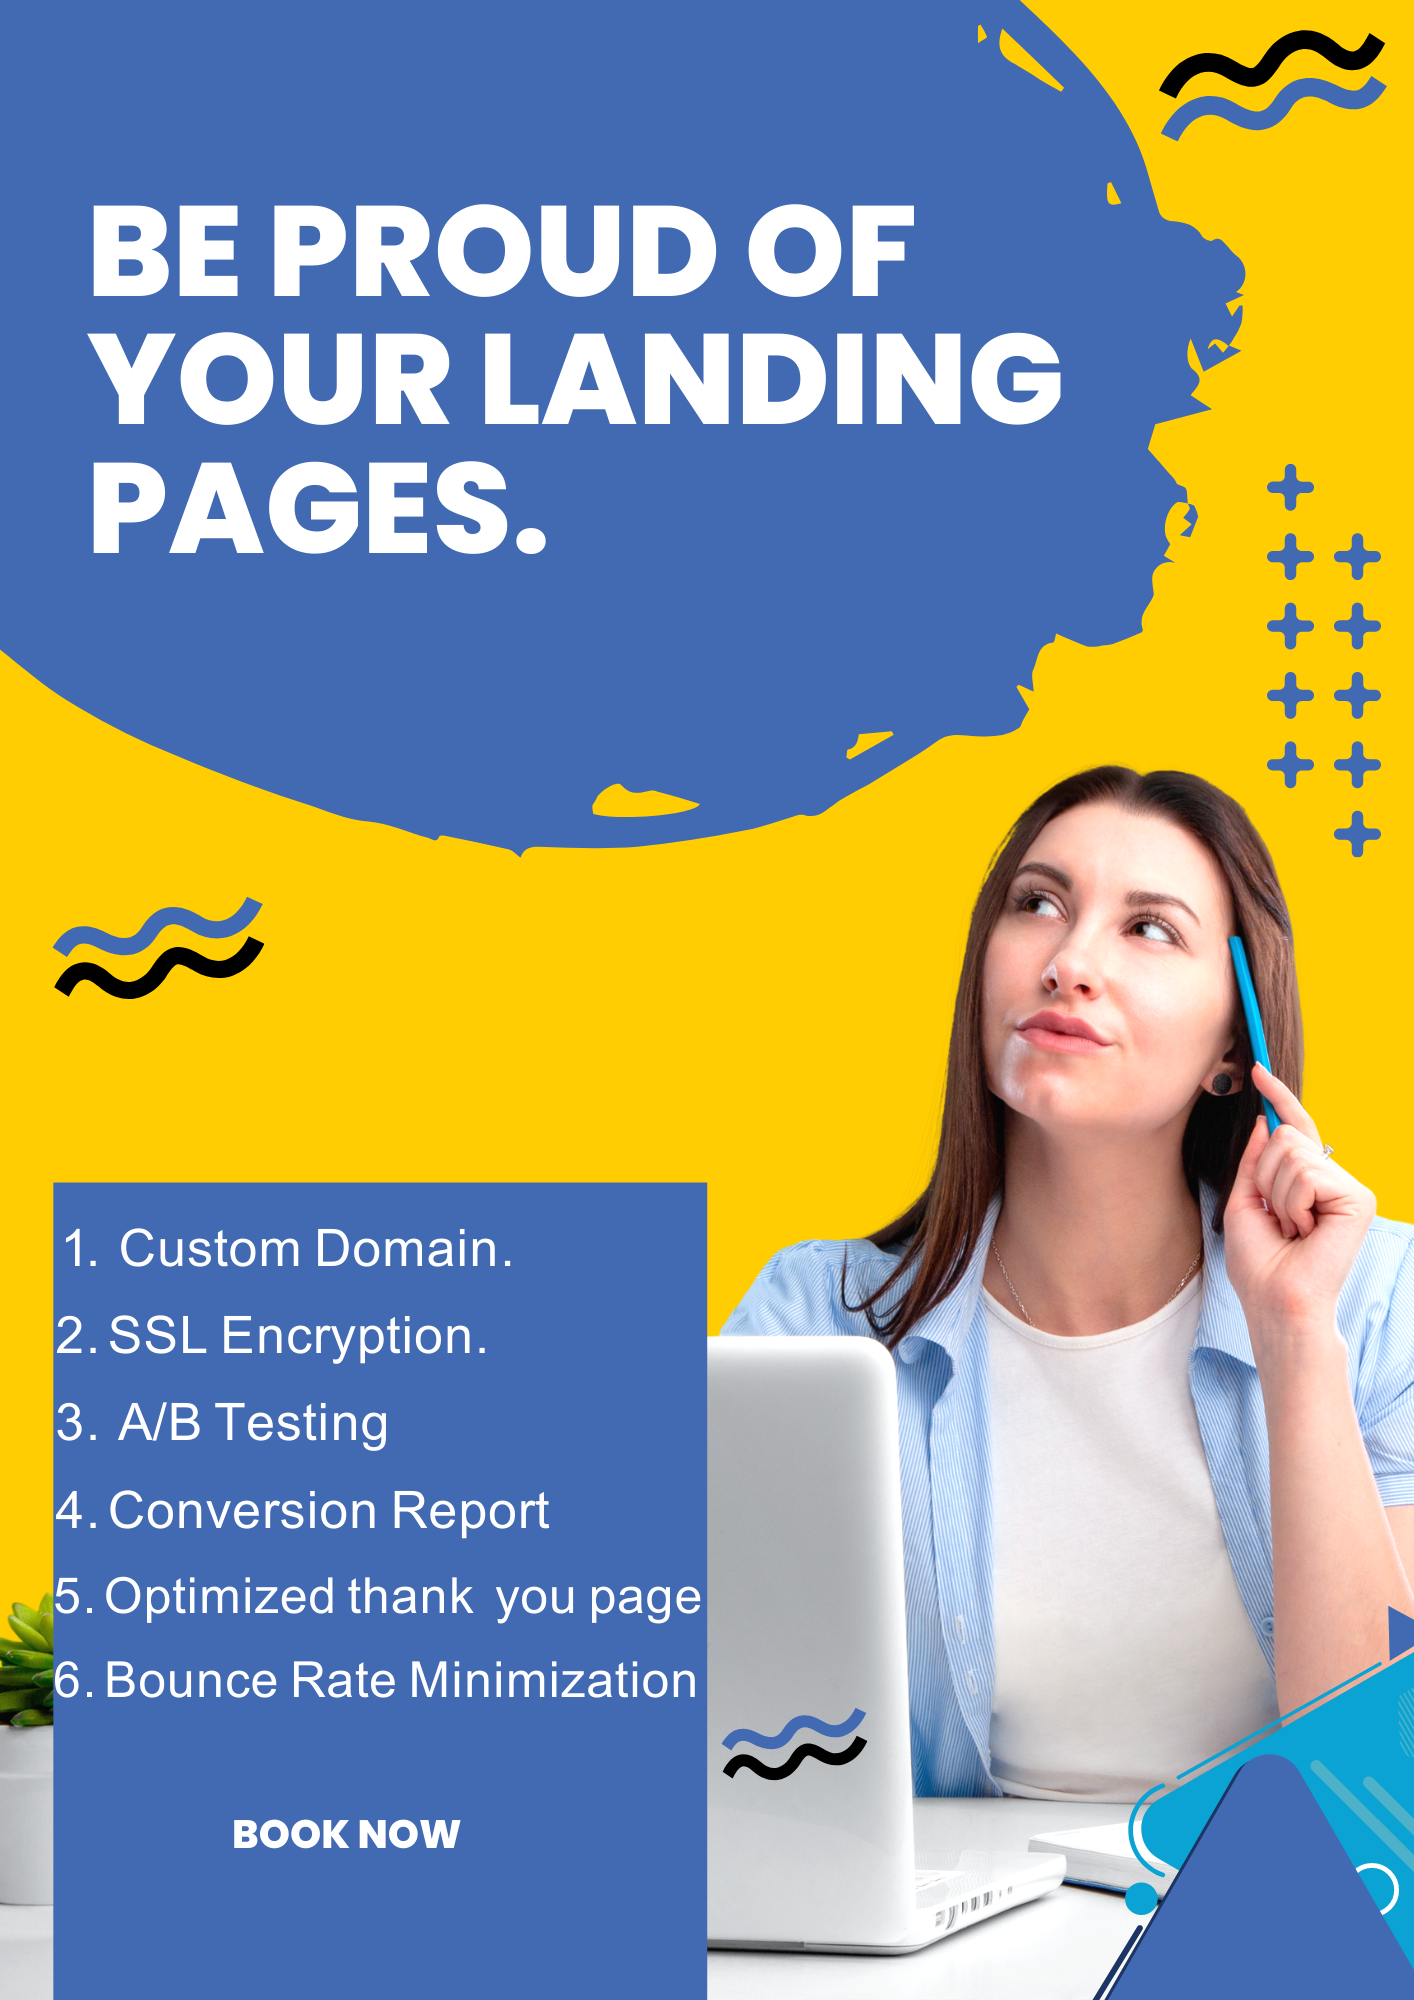 I will build landing pages that will attract more customers to your business and increase your sales conversion.